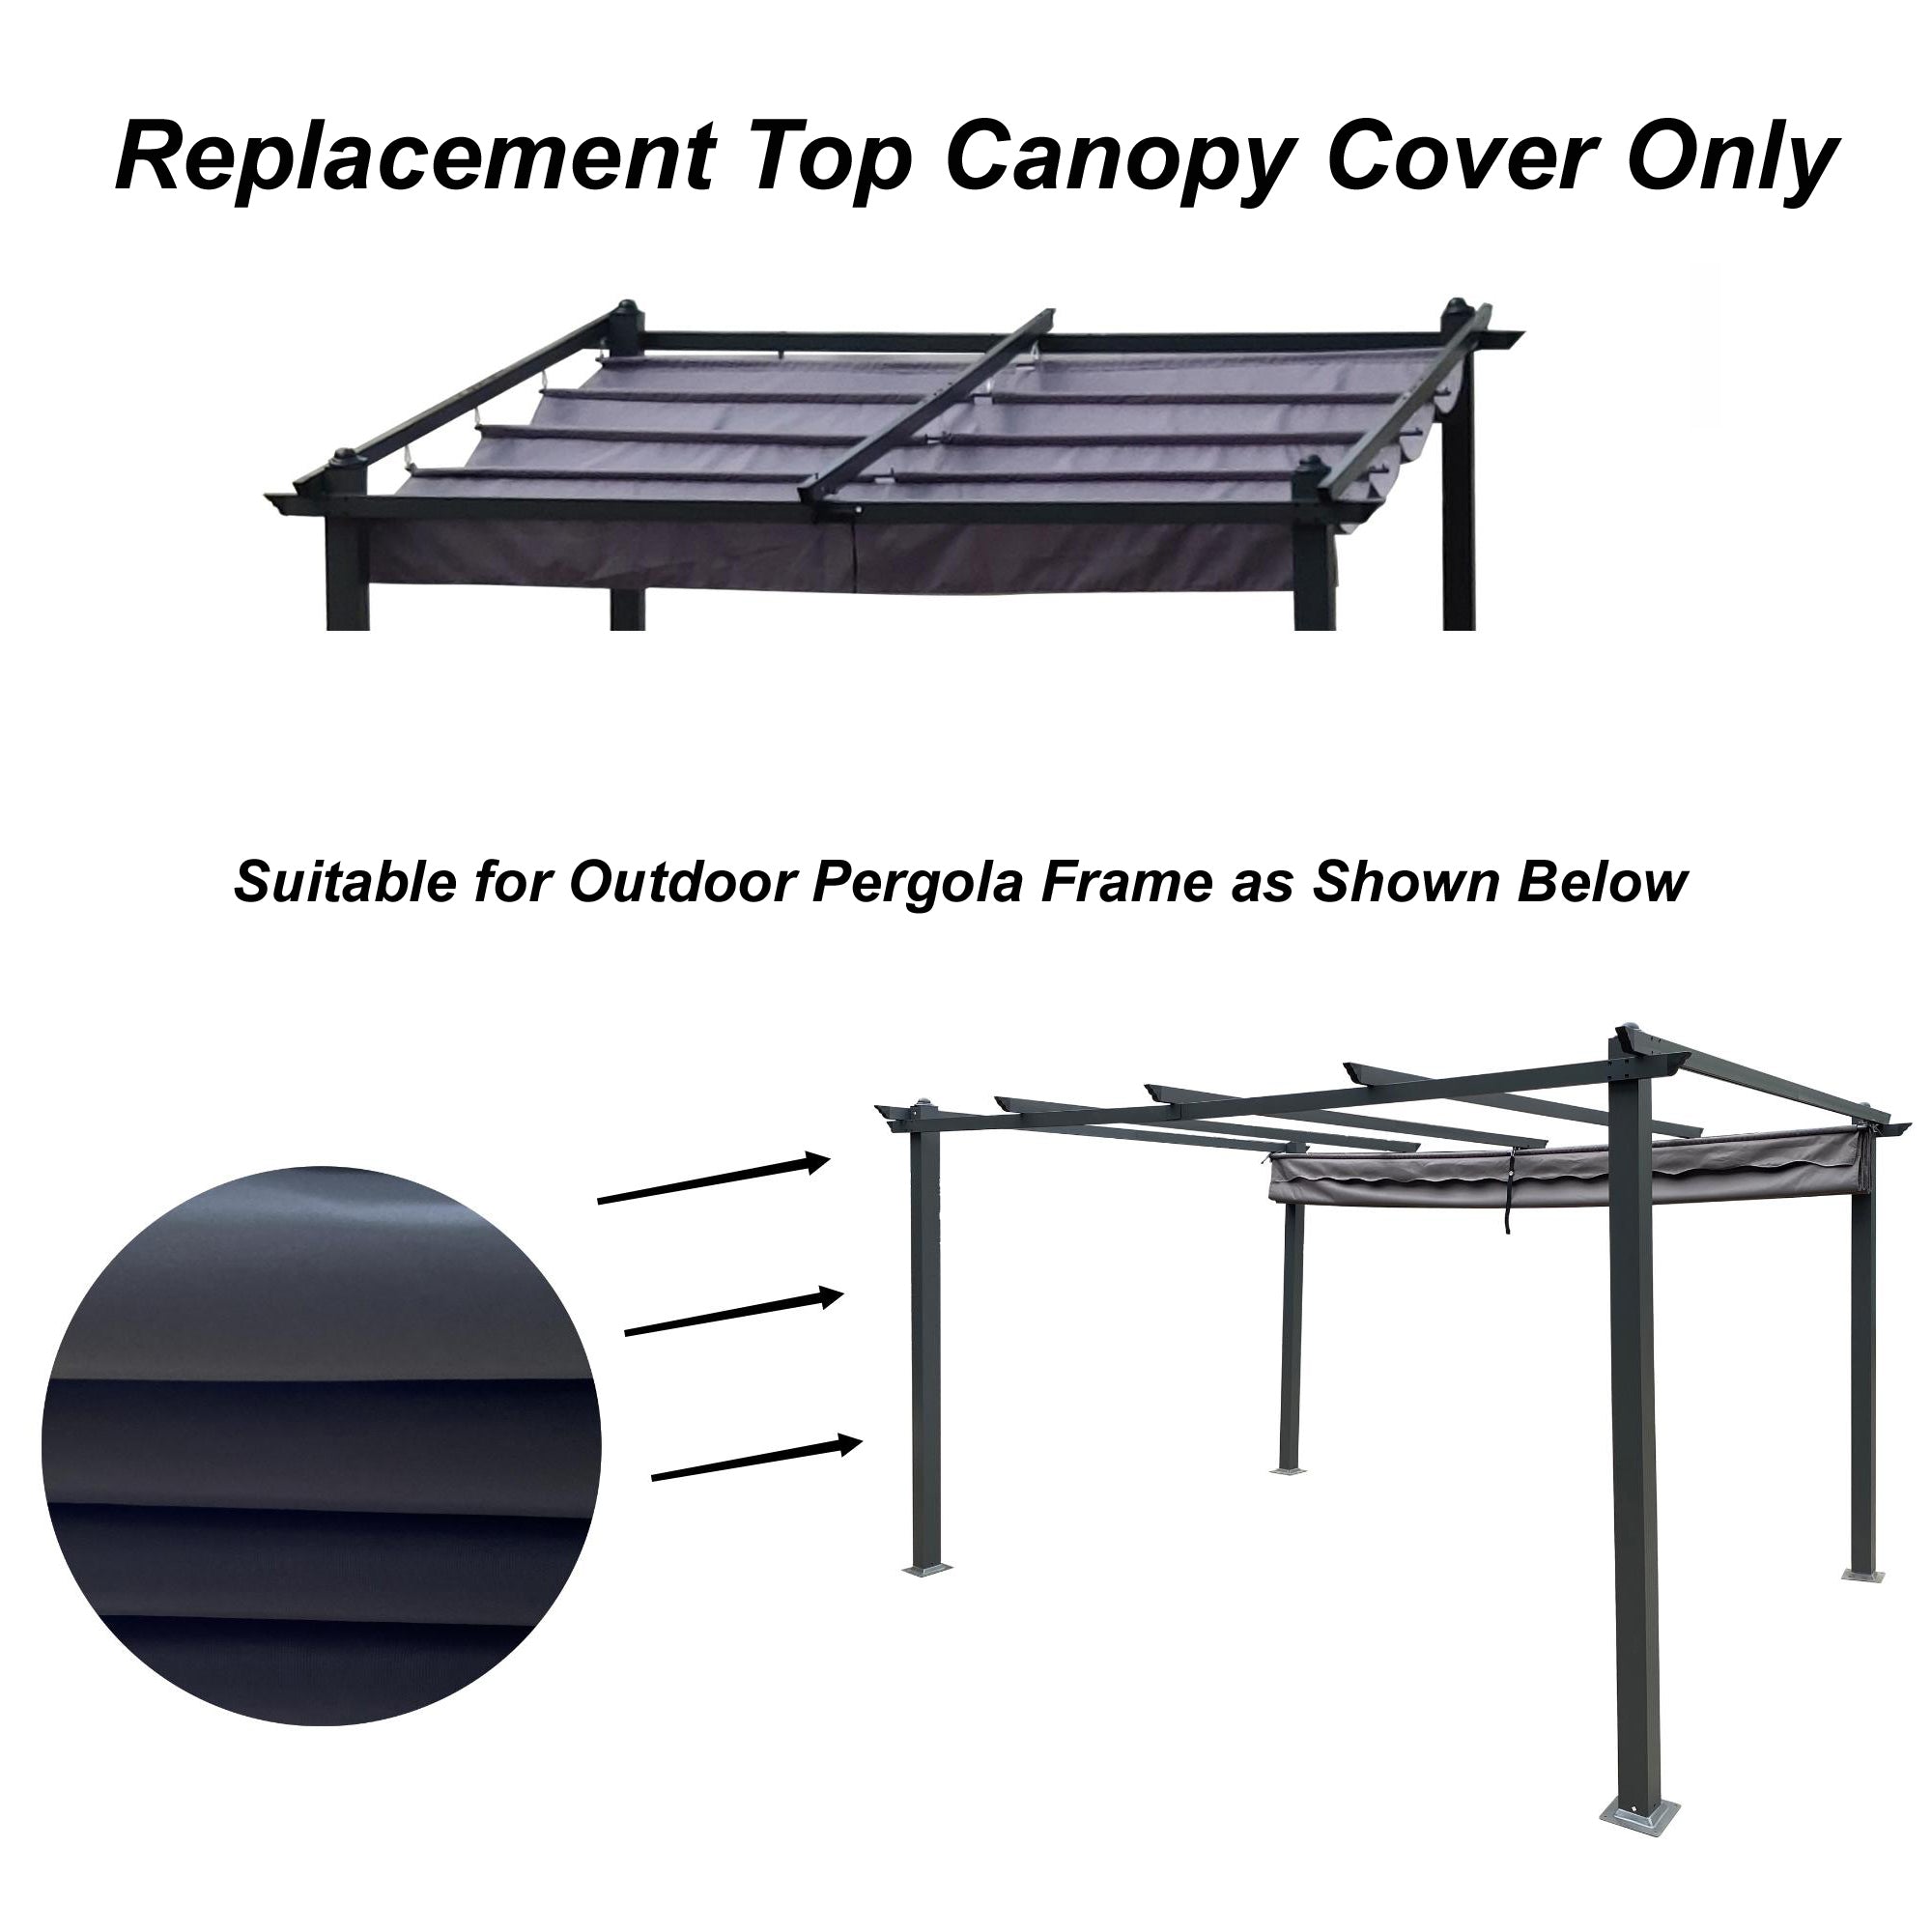 Replacement Canopy Top Cover Fabric for 13 x 10 Ft gray-polyester